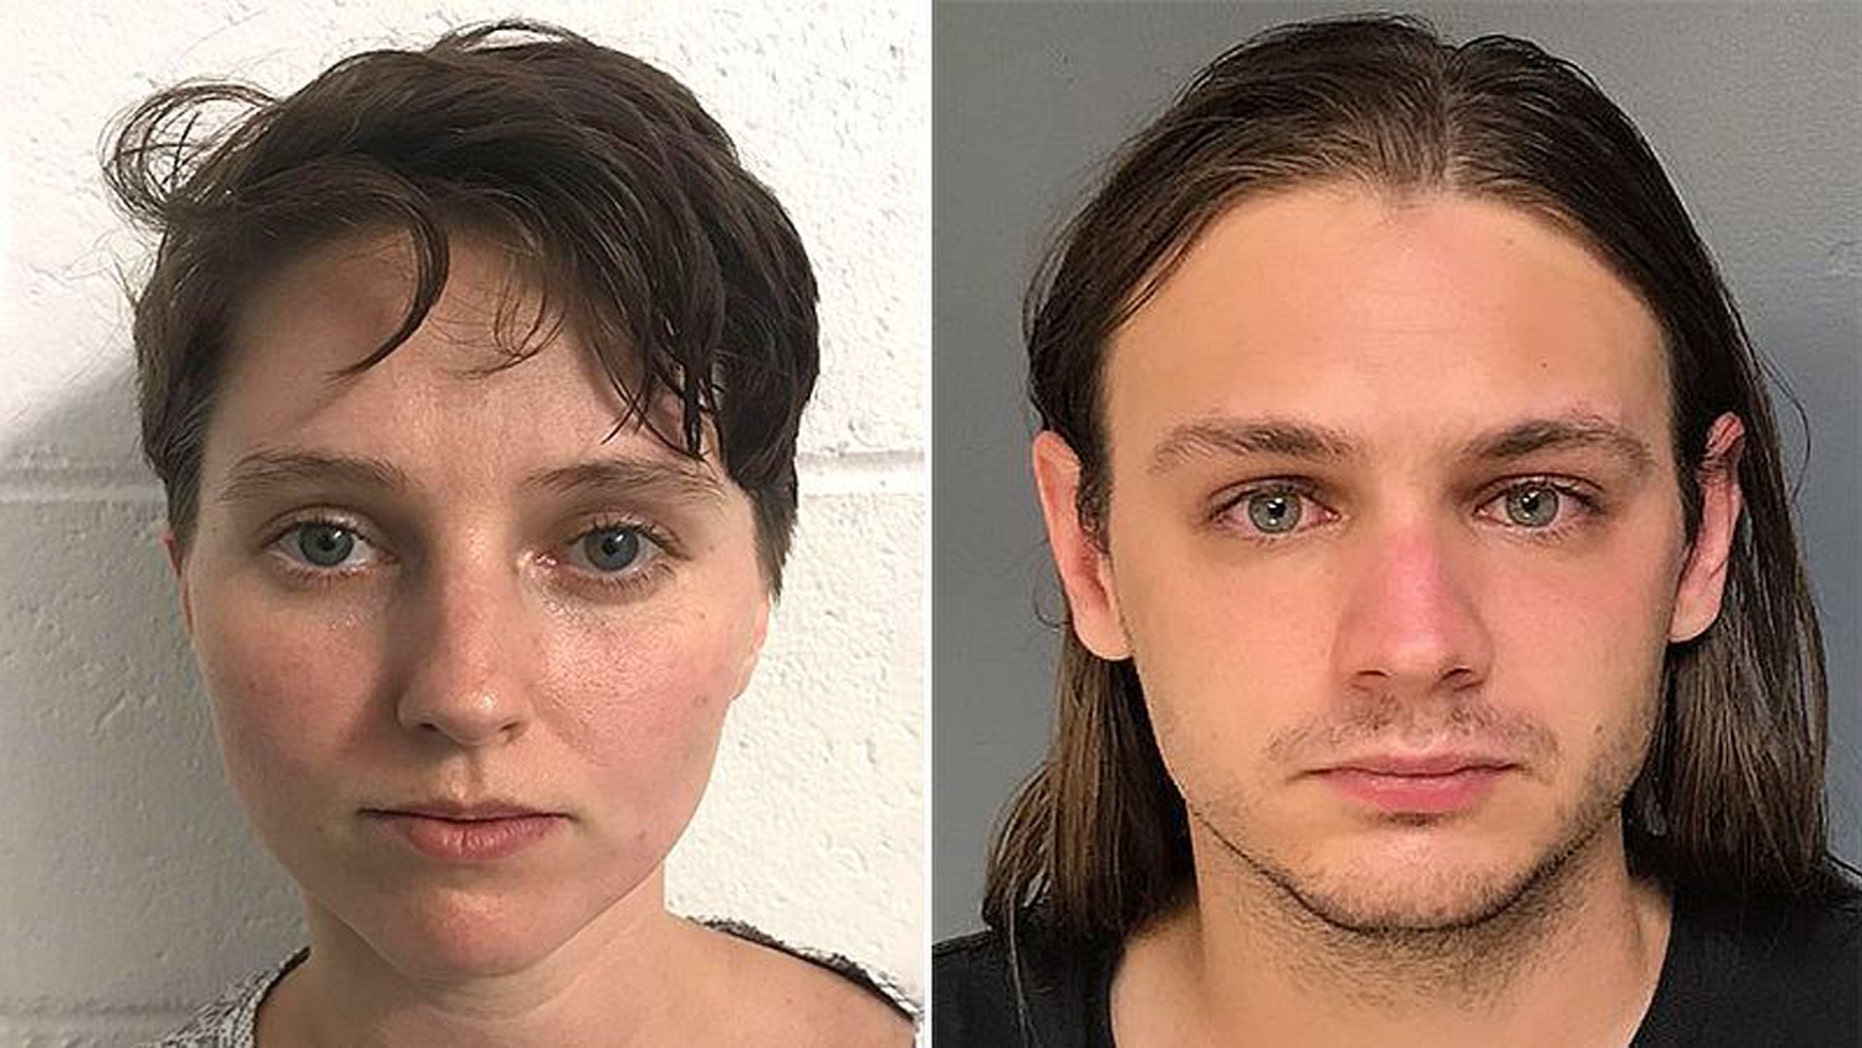 Making Babies Porn - Ohio mom allegedly used 3-year-old daughter to make child ...